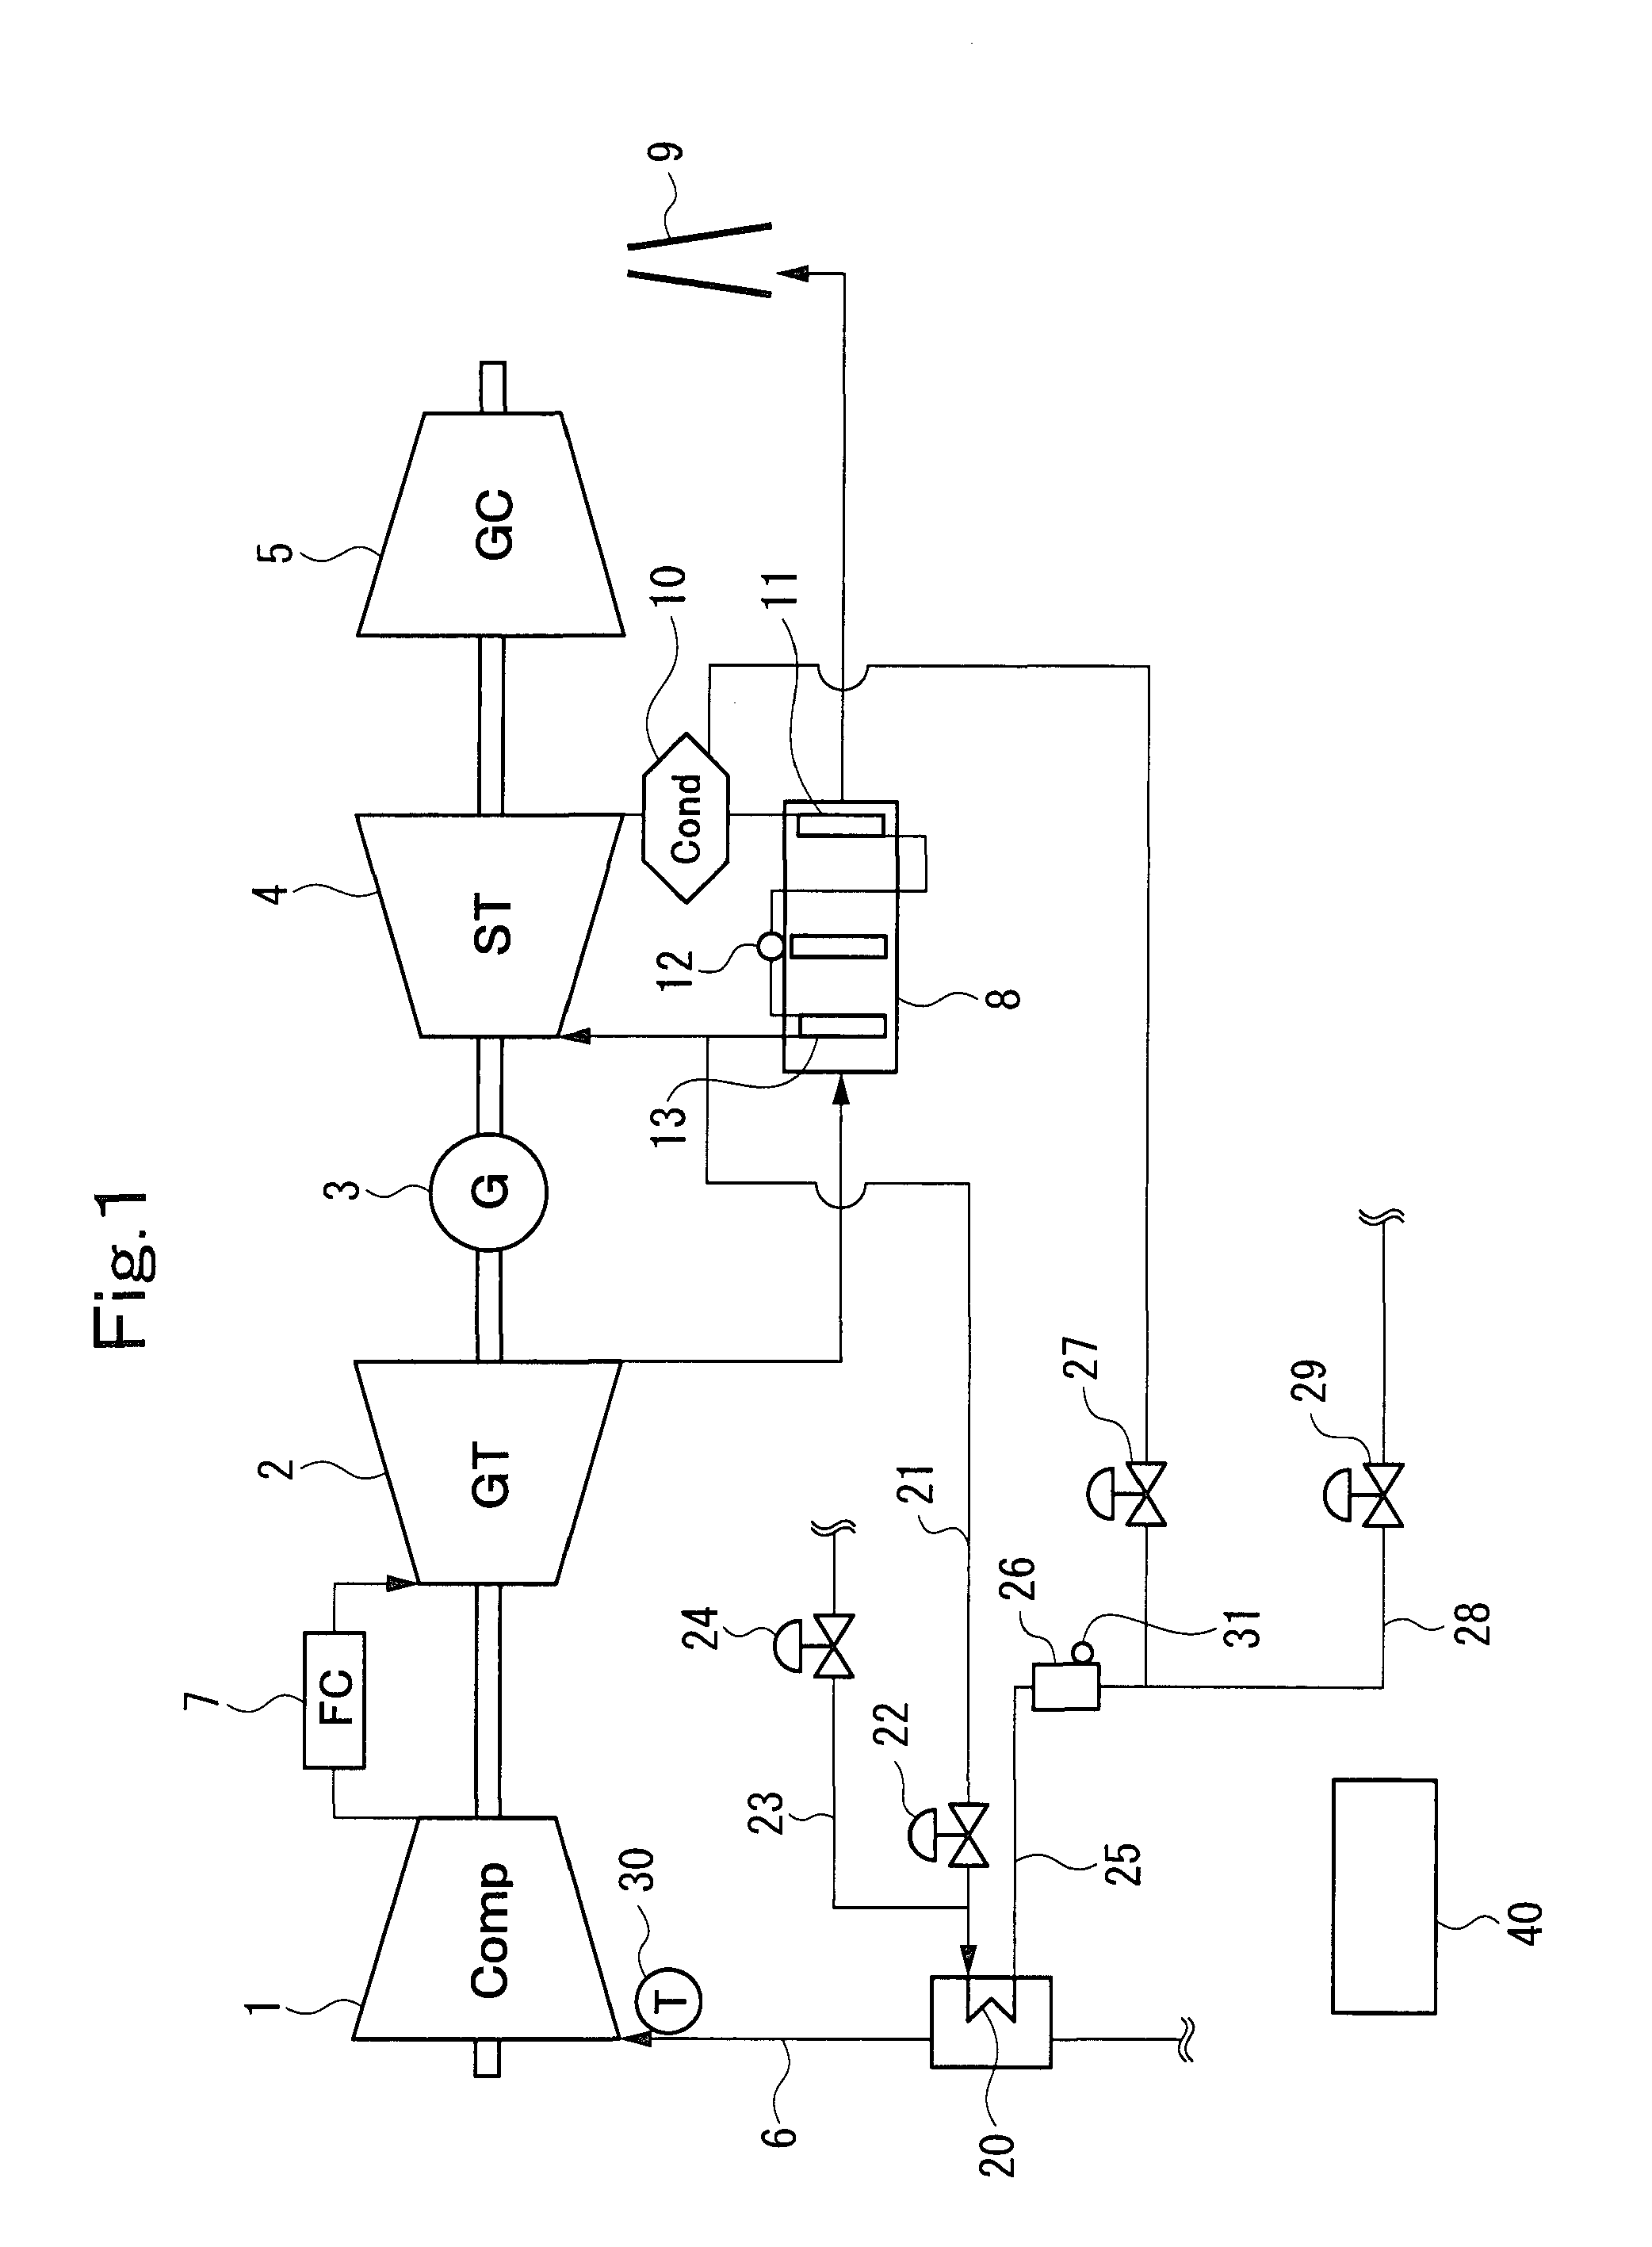 Intake air heating system of combined cycle plant